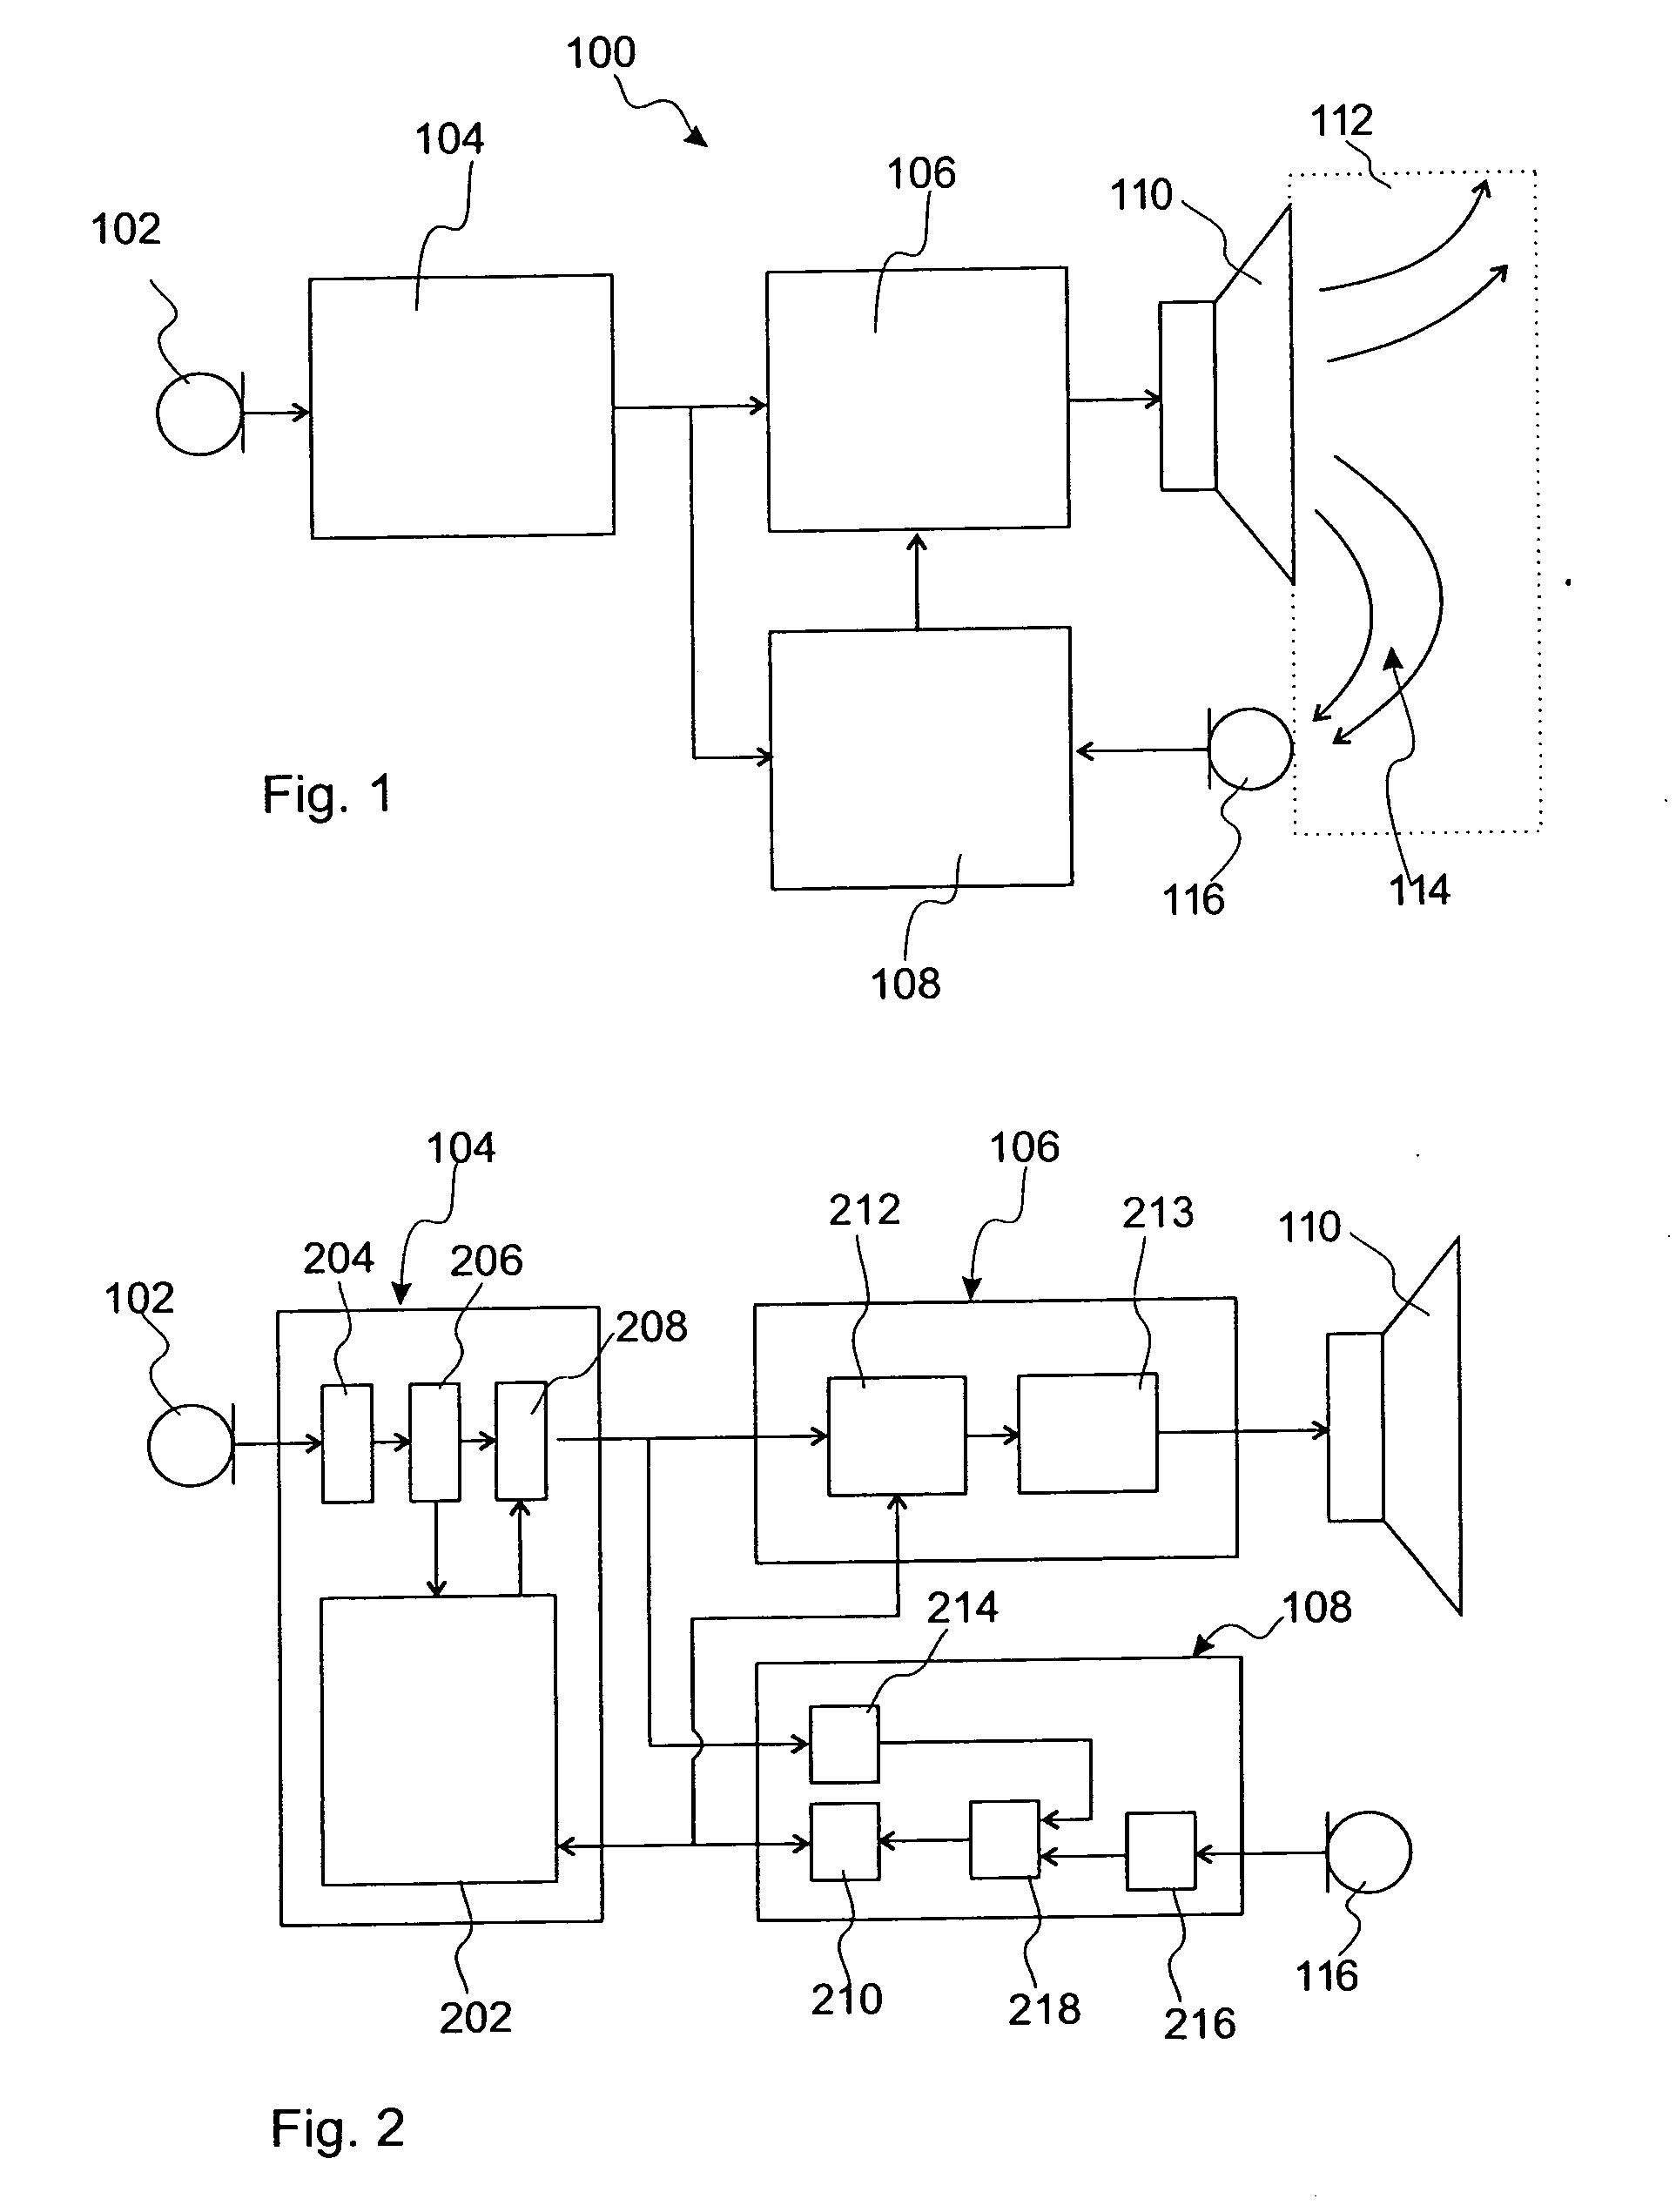 Hearing instrument with linearized output stage